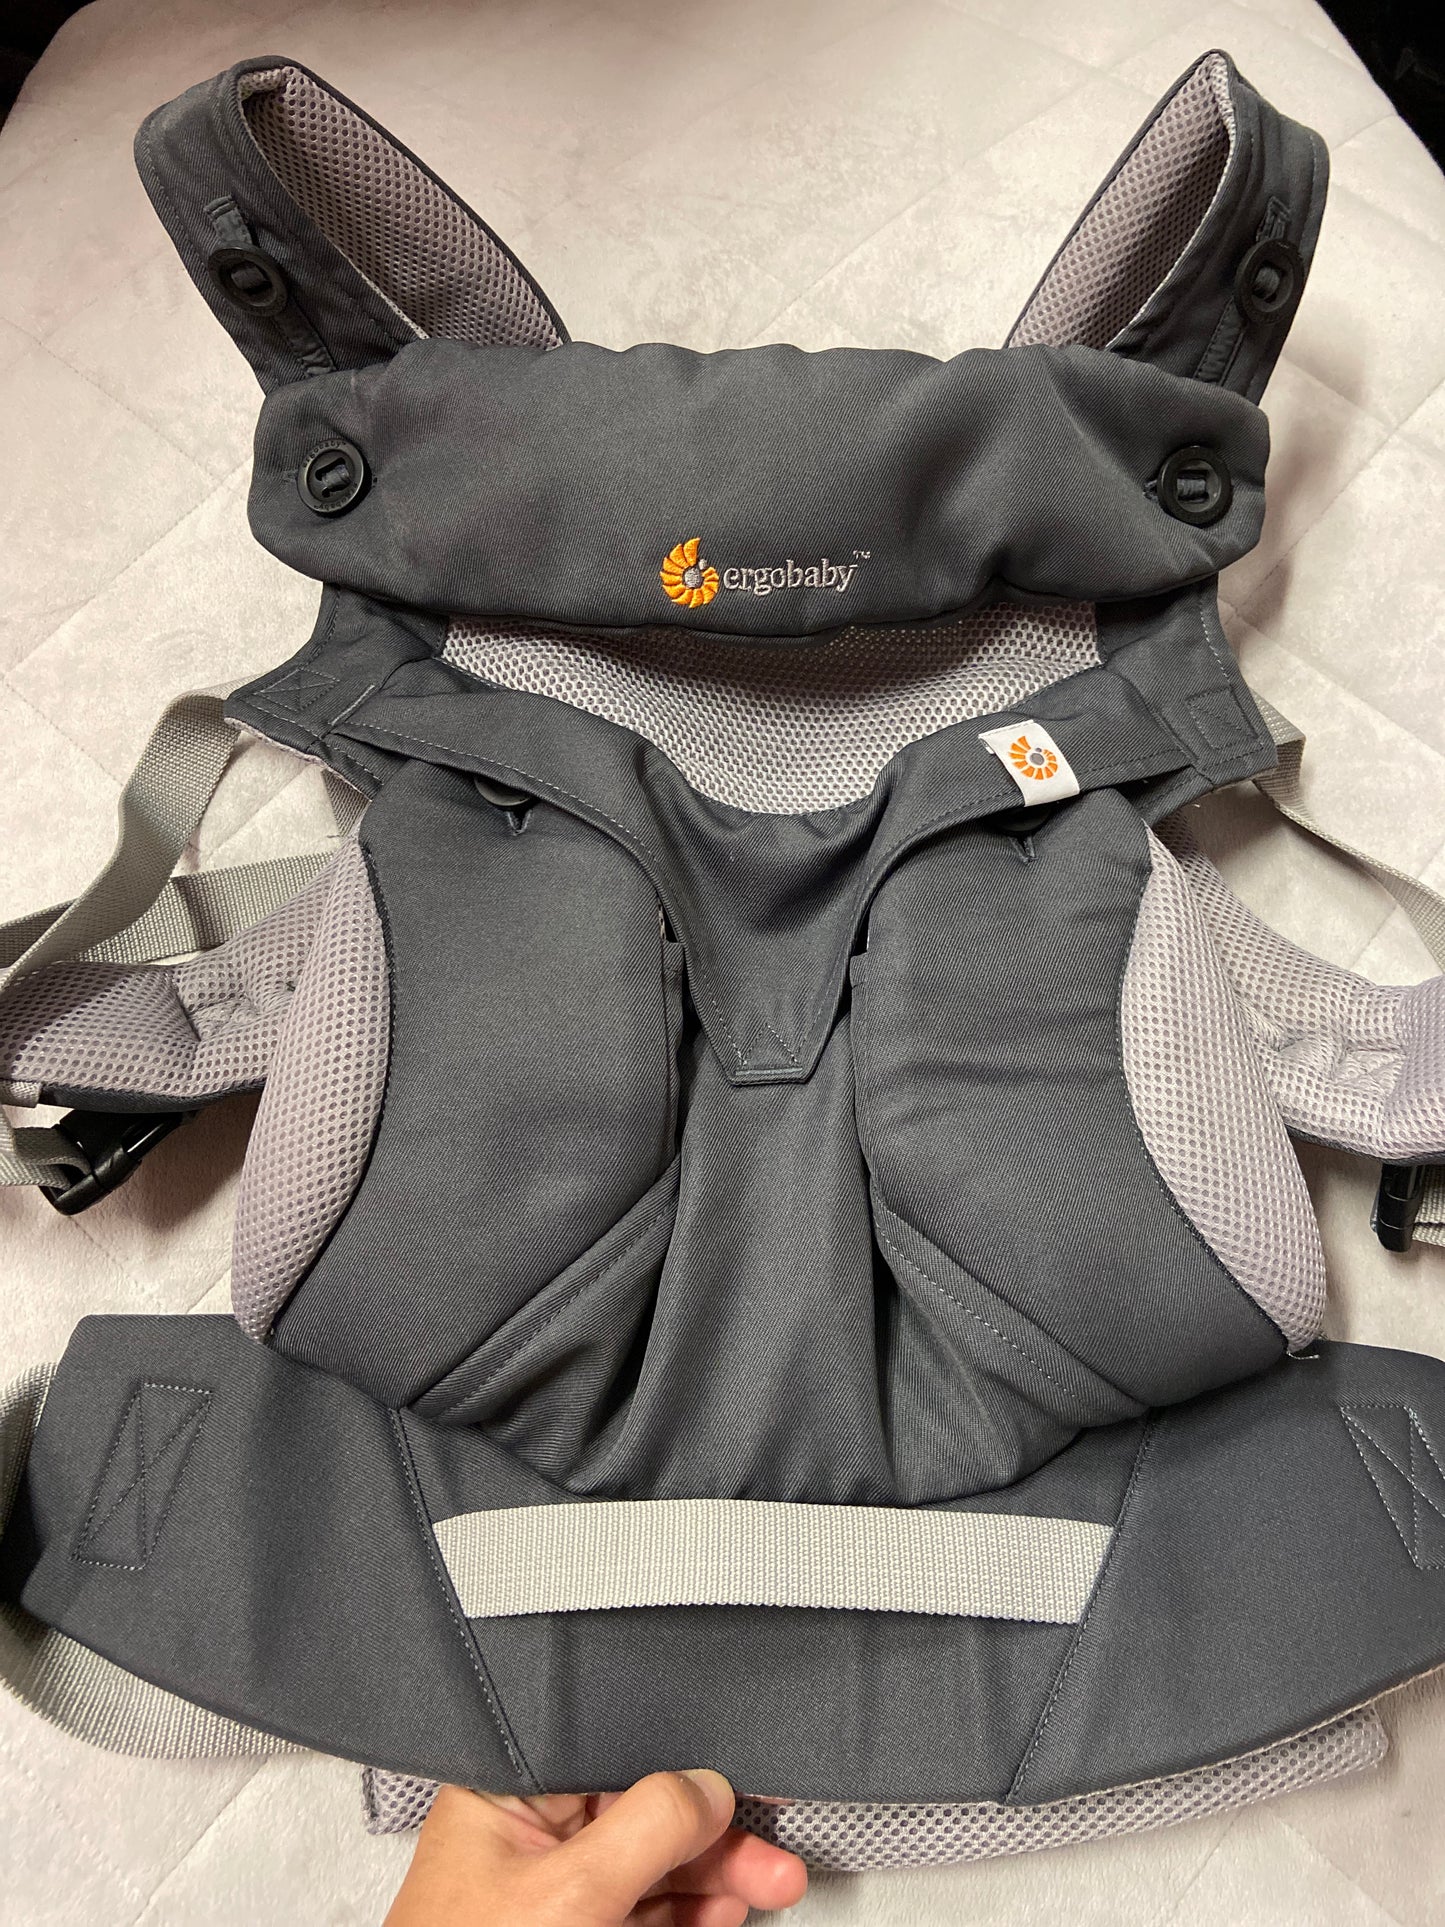 Ergobaby All-Positions 360 Carrier